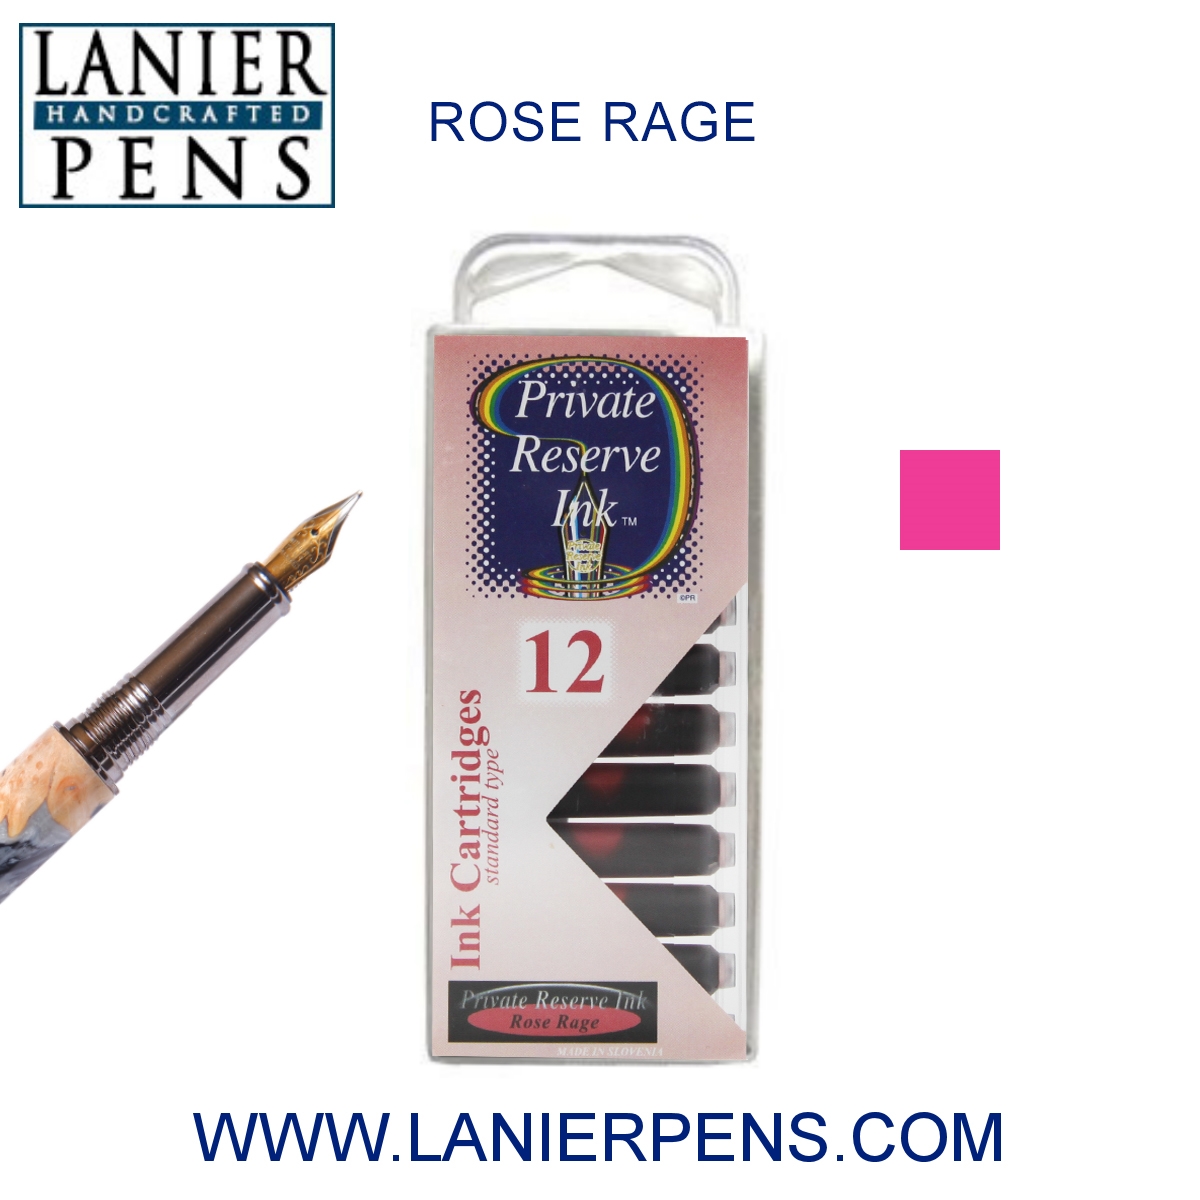 12 Pack - Private Reserve Ink, Universal Fountain Pen Ink Cartridges Clear Case, Rose Rage by Lanier Pens